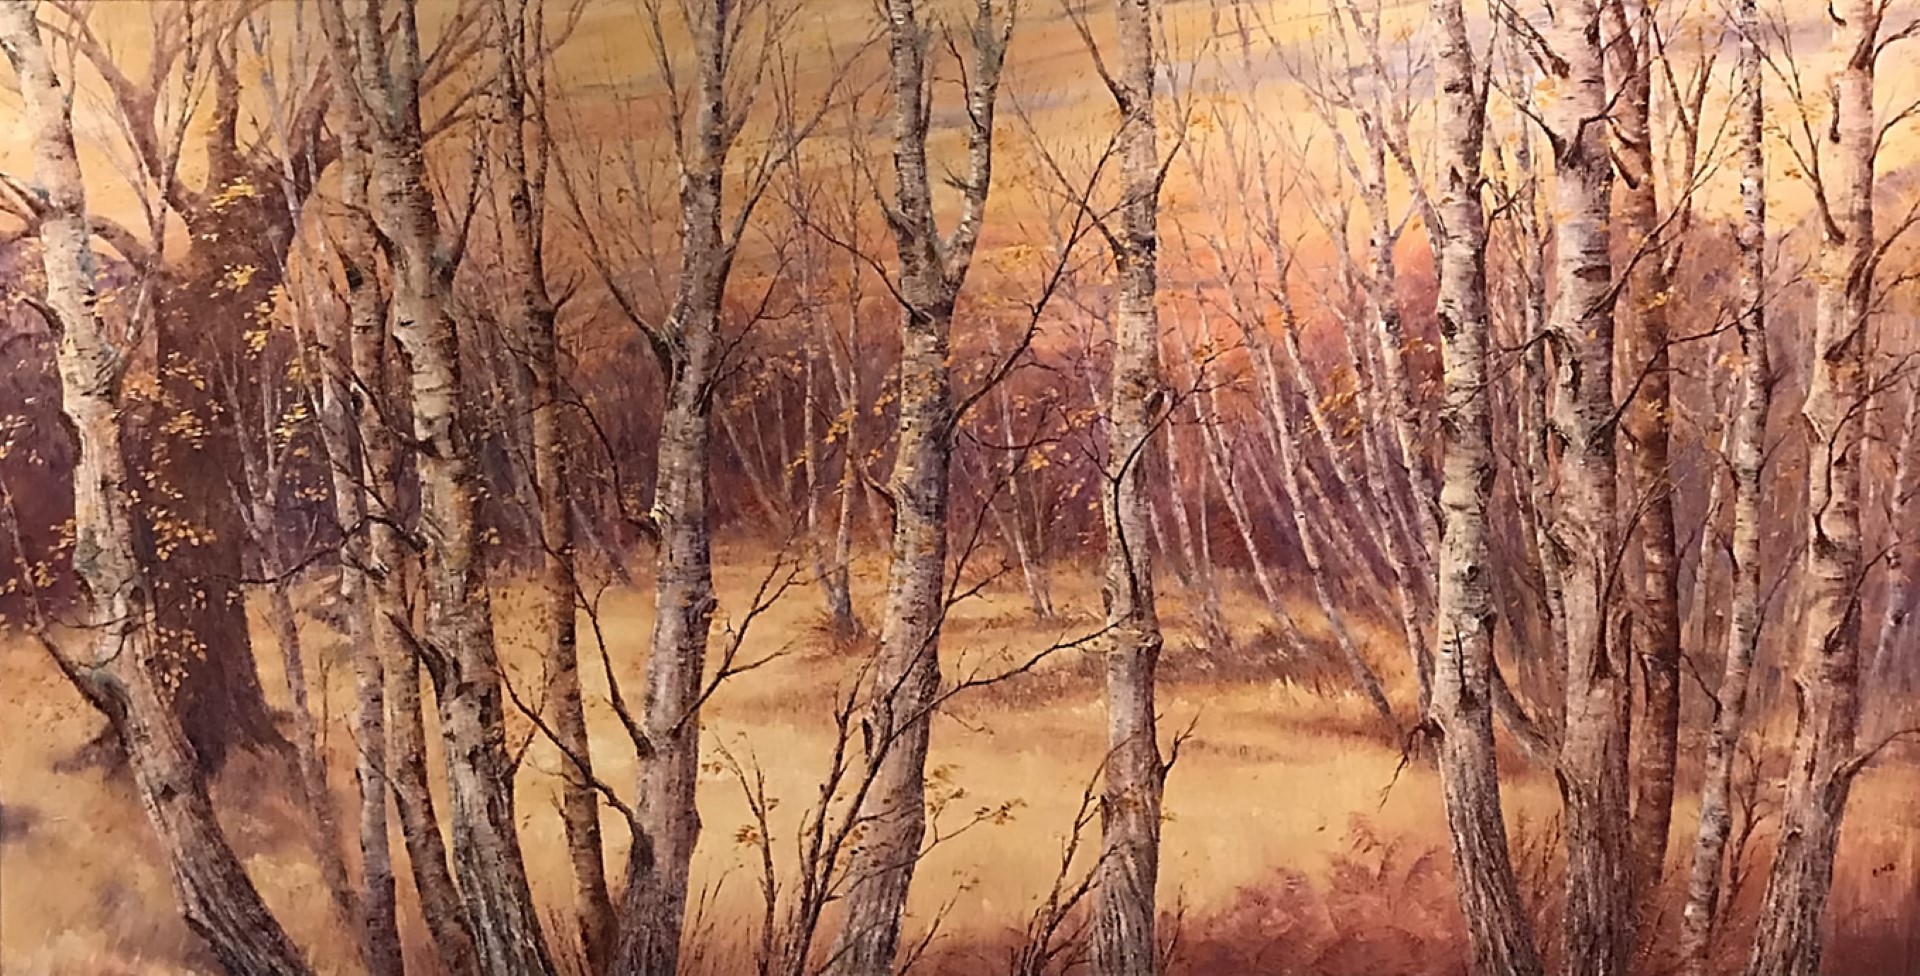 Silver Birches, Highlands (Scotland) – Oil on canvas – 5 ft 6 inches x 2 ft 10 inches